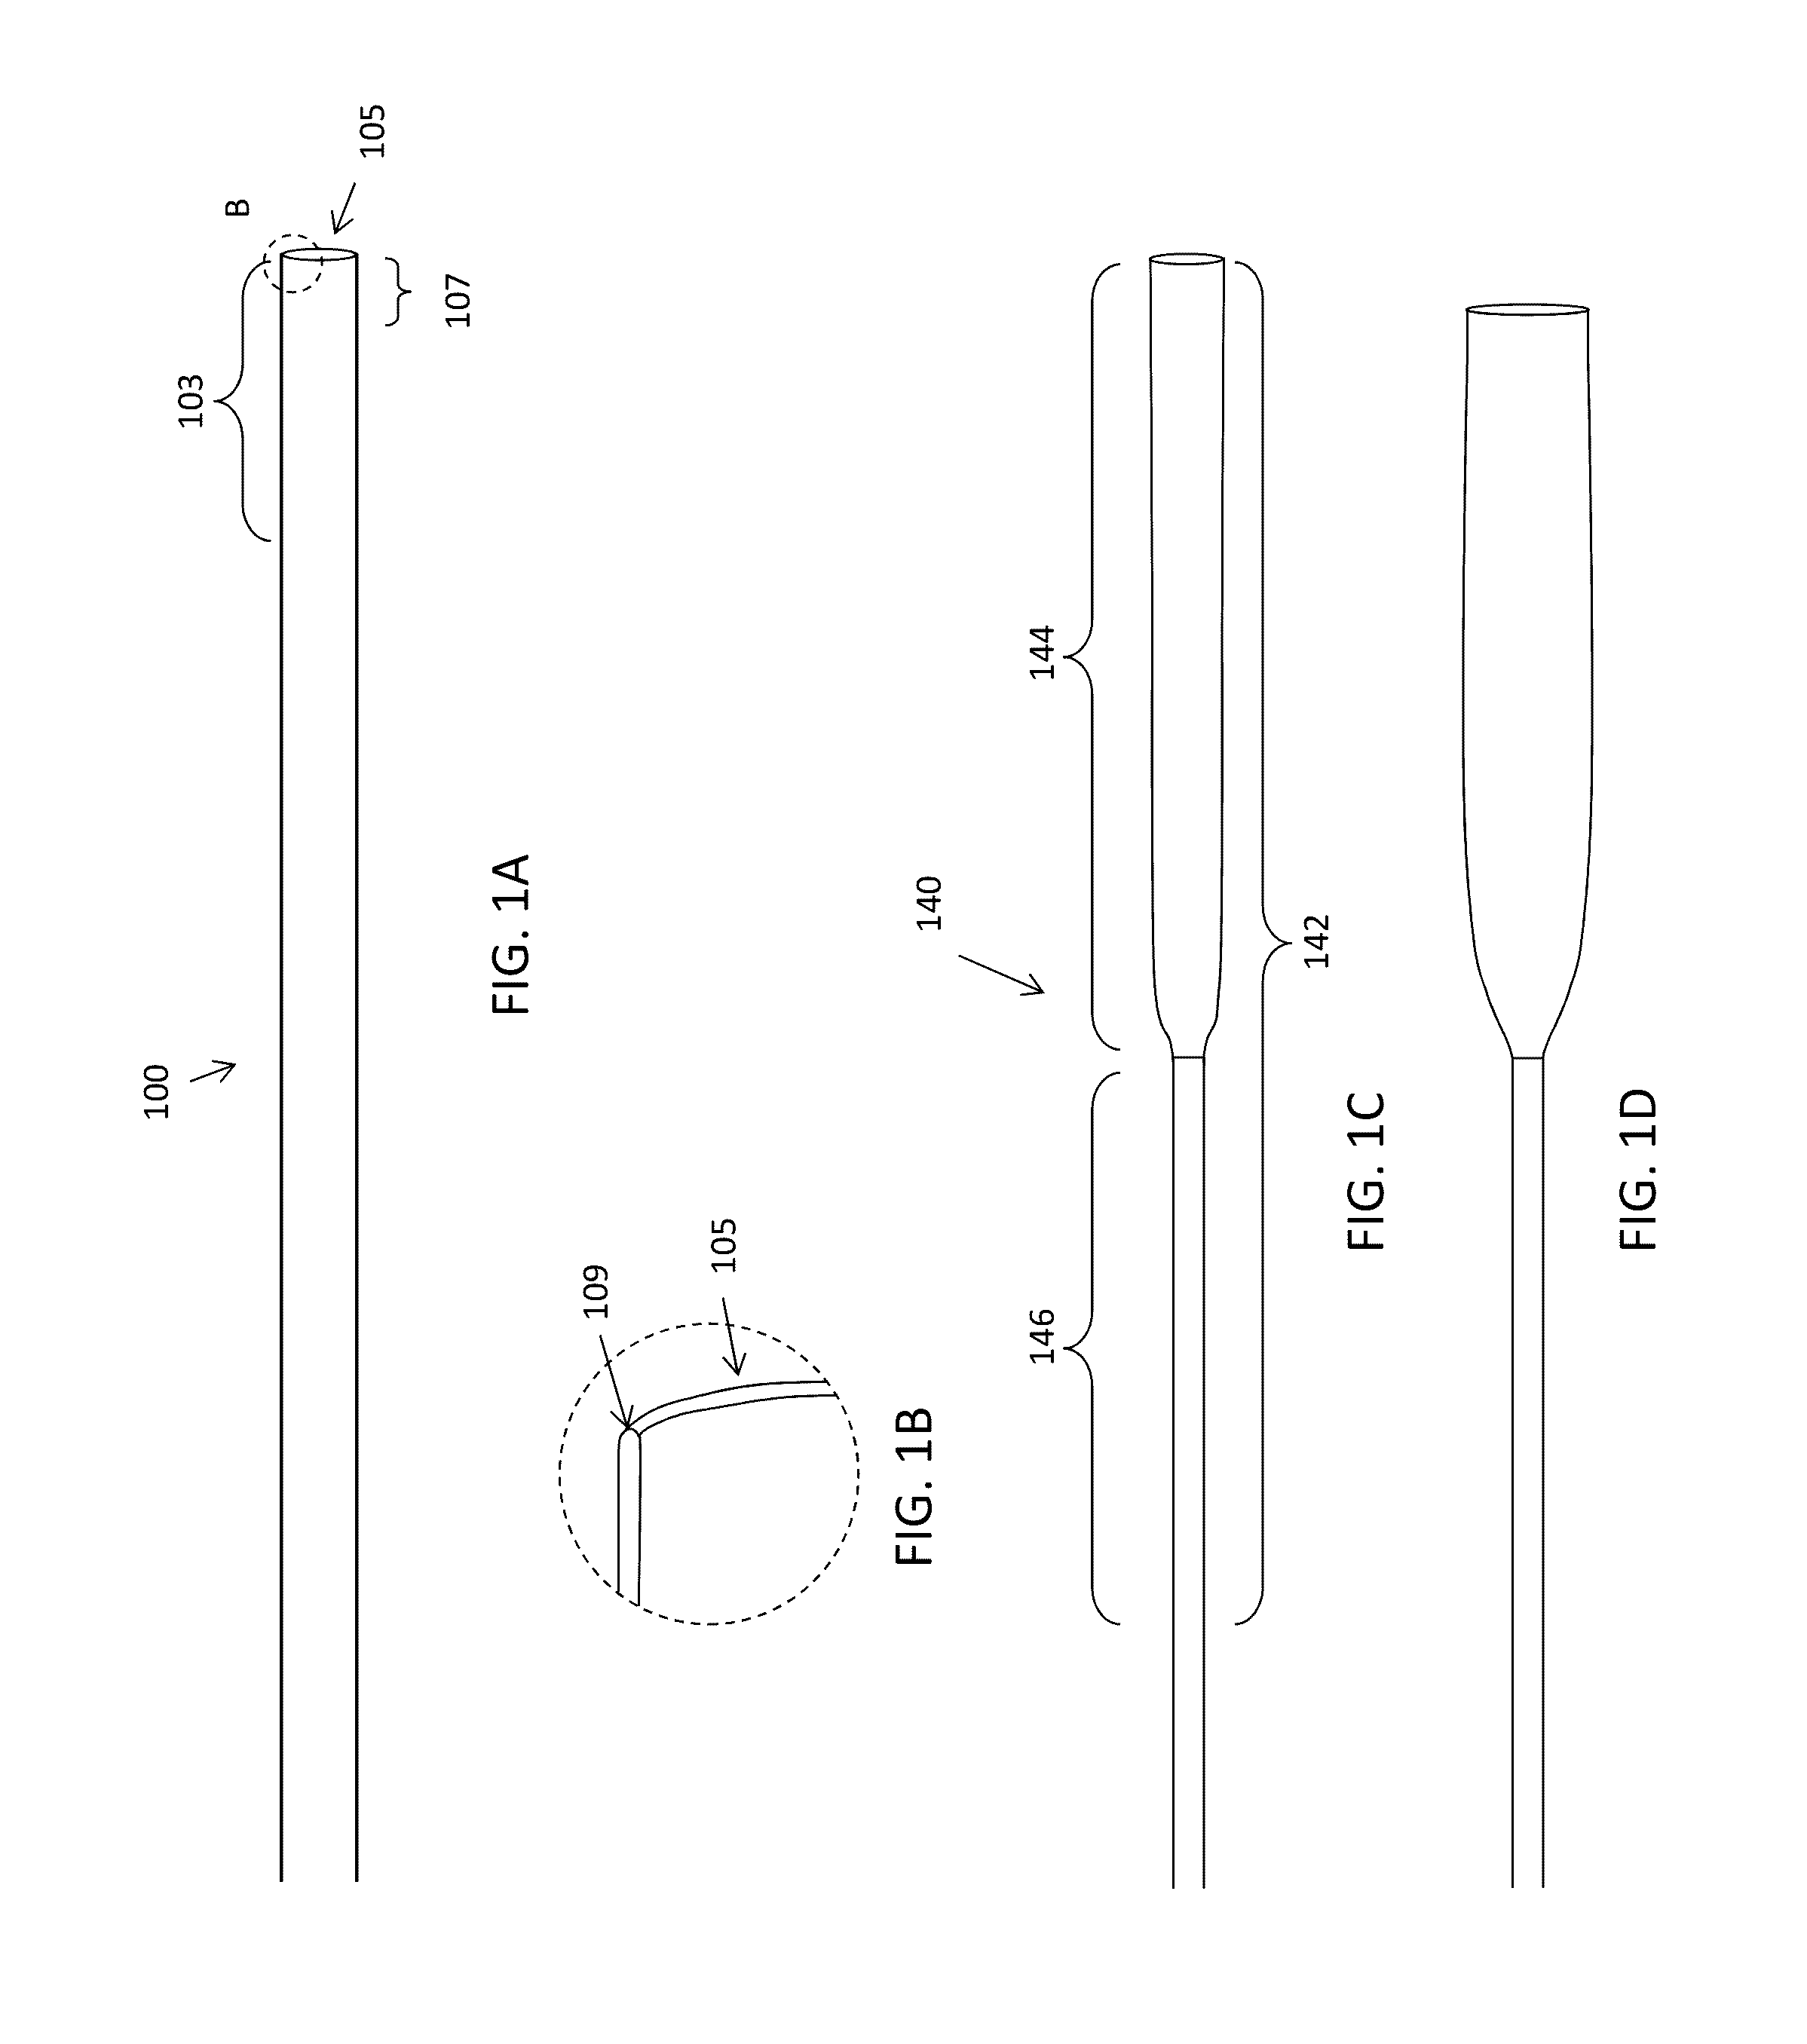 Mechanical thrombectomy apparatuses and methods